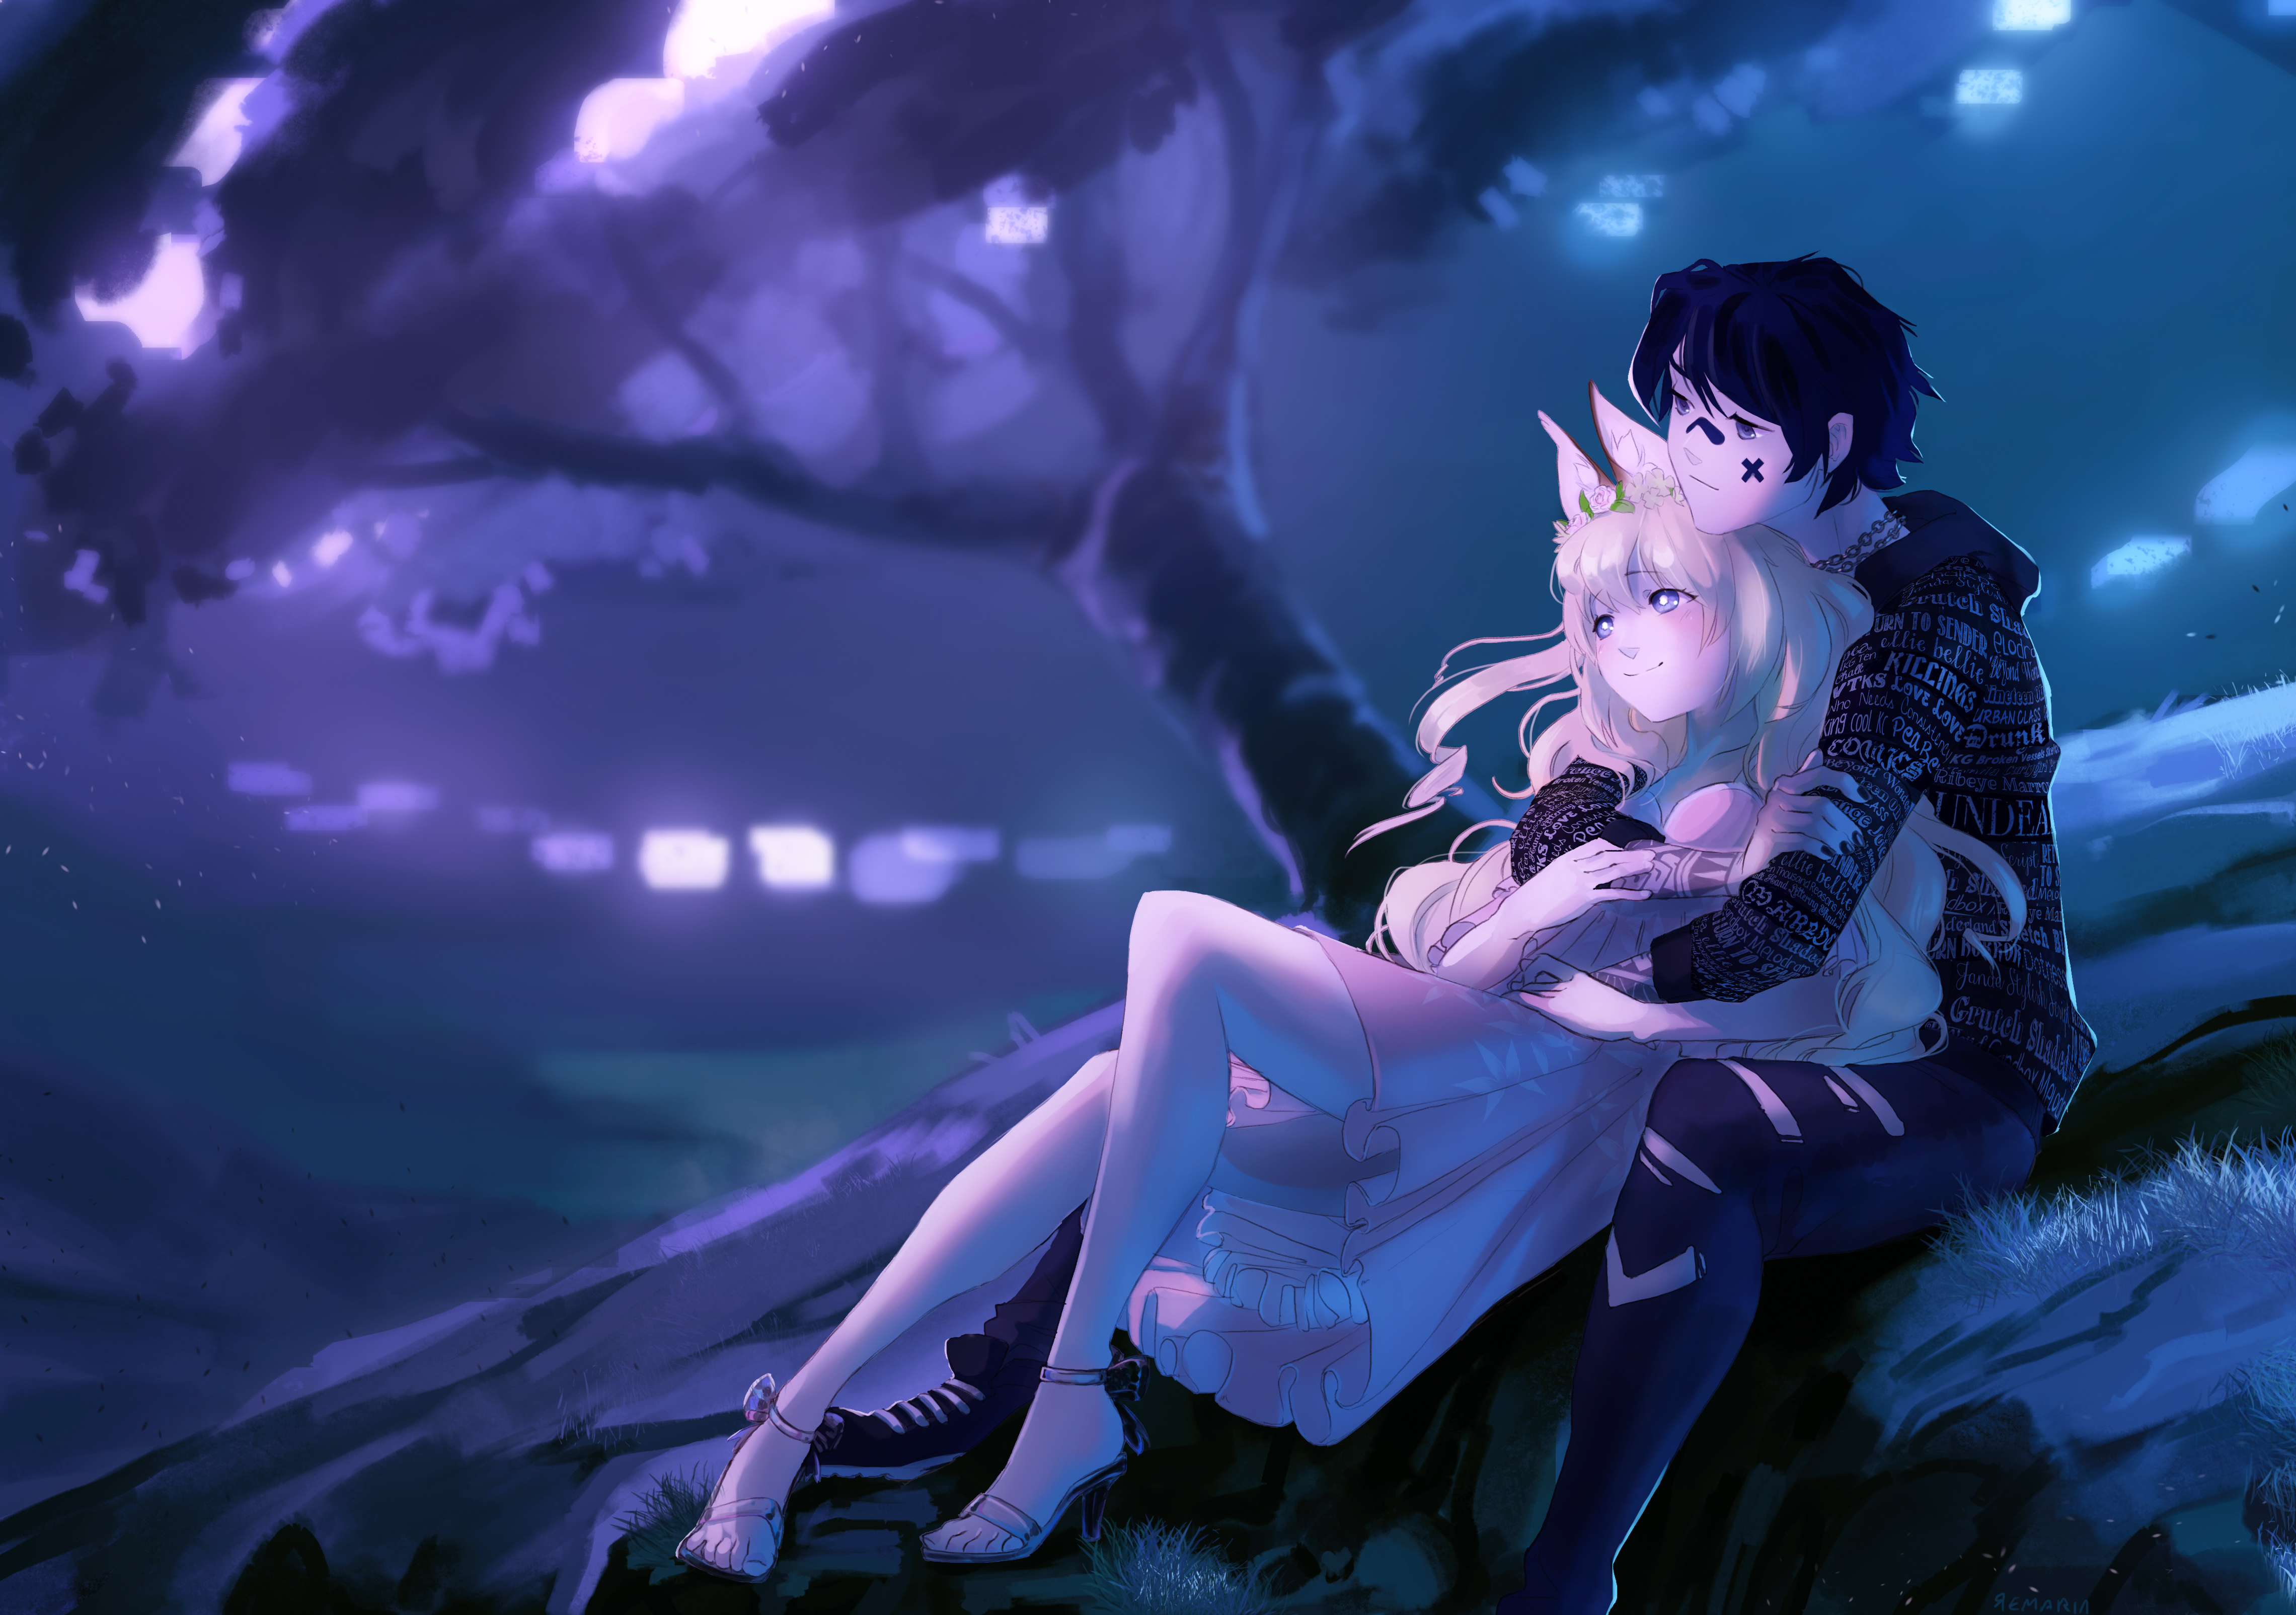 120+ Anime Couple DP: Capture Your Love Story In Anime Form